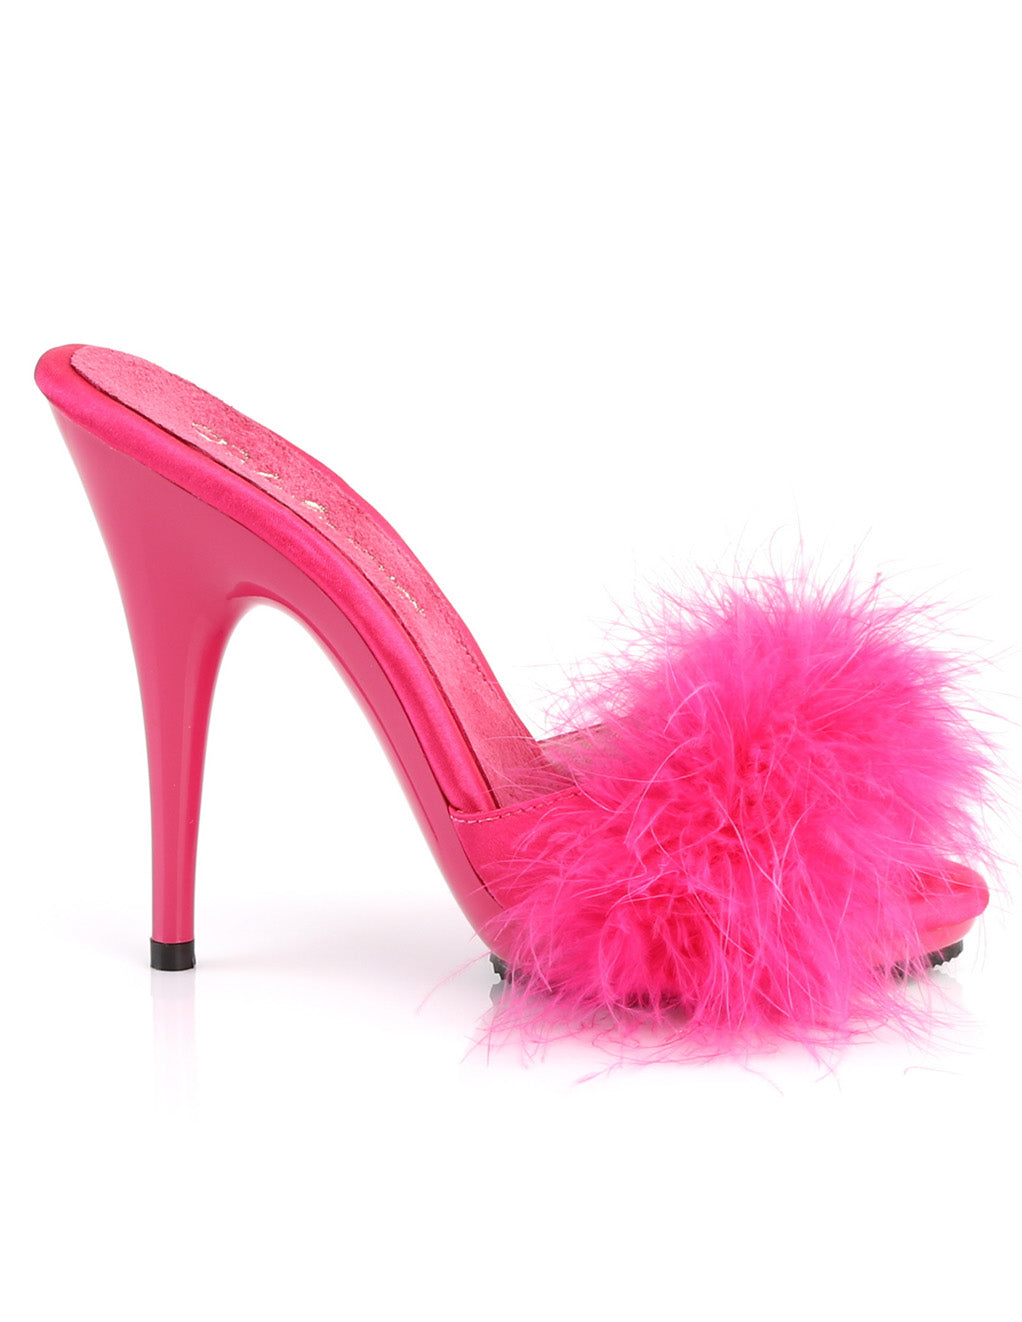 Fabulicious Marabou Poise 501F- Hot Pink- Side